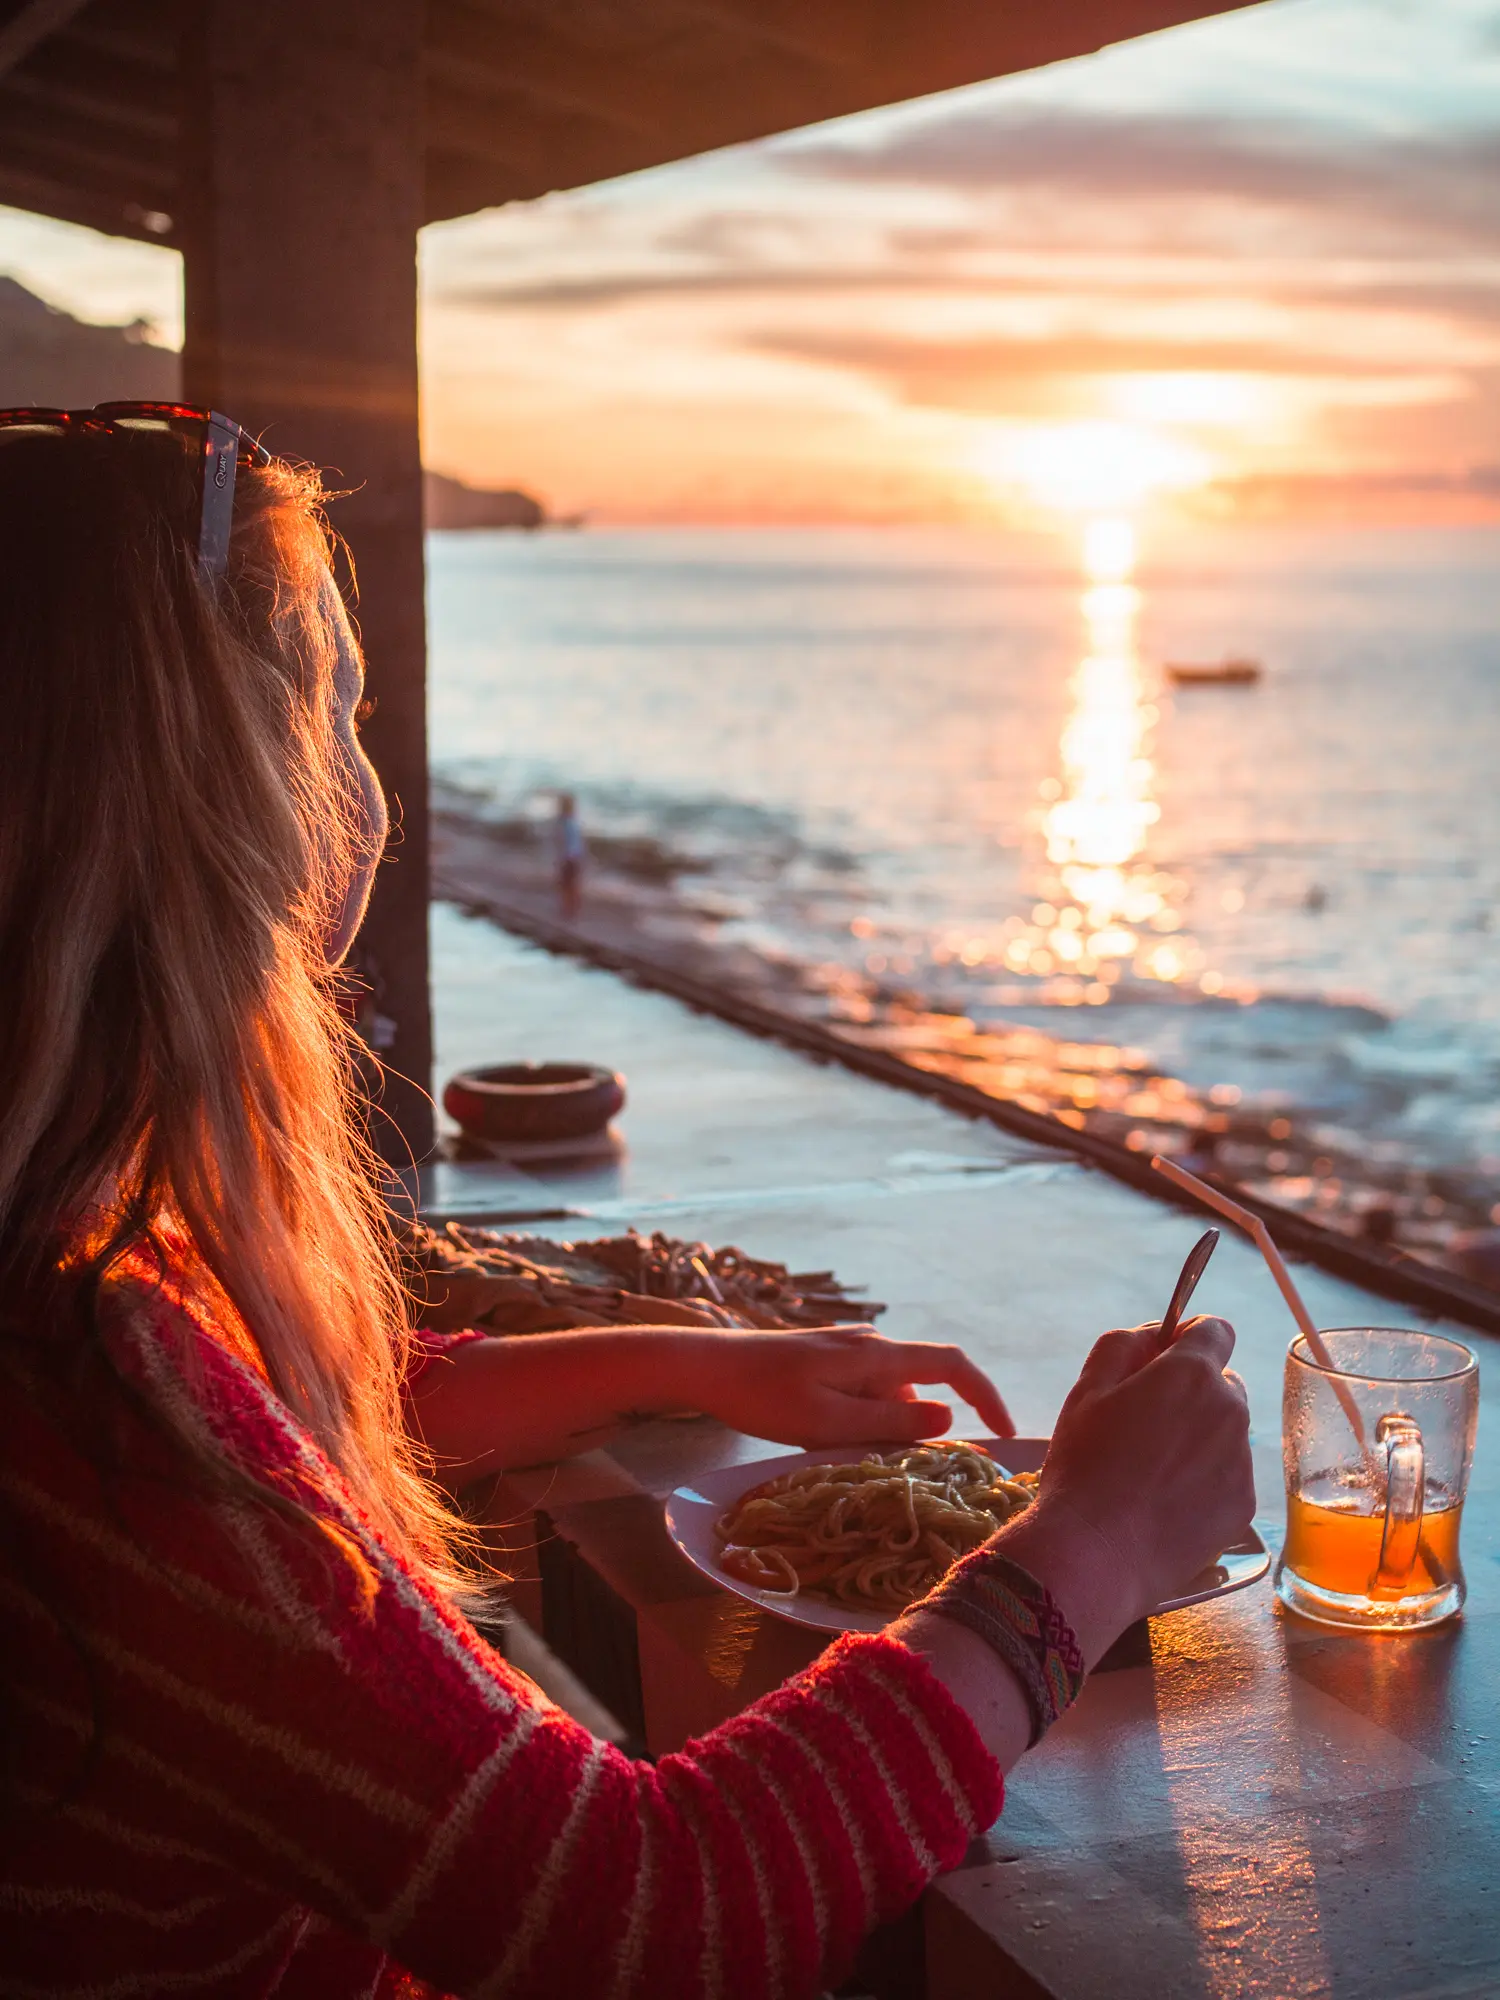 Woman wearing a red sweater sitting at a table eating noodles looking out at the sunset at Bingin Beach in Bali vs. Lombok.